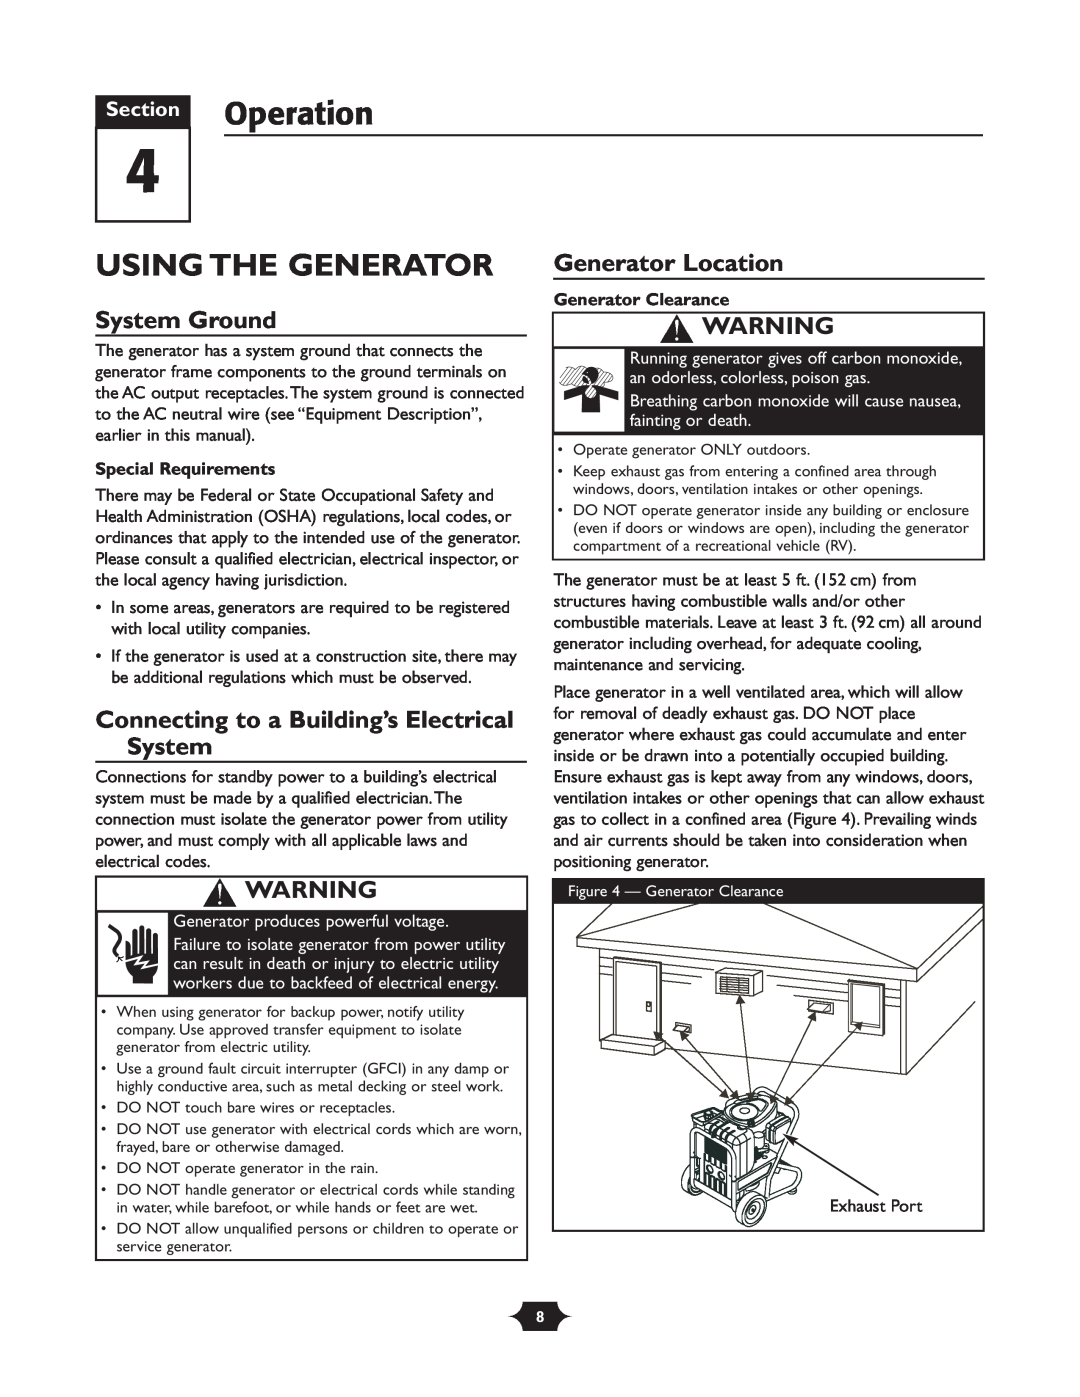 Briggs & Stratton 30237 owner manual Section Operation, Using The Generator, System Ground, Generator Location 